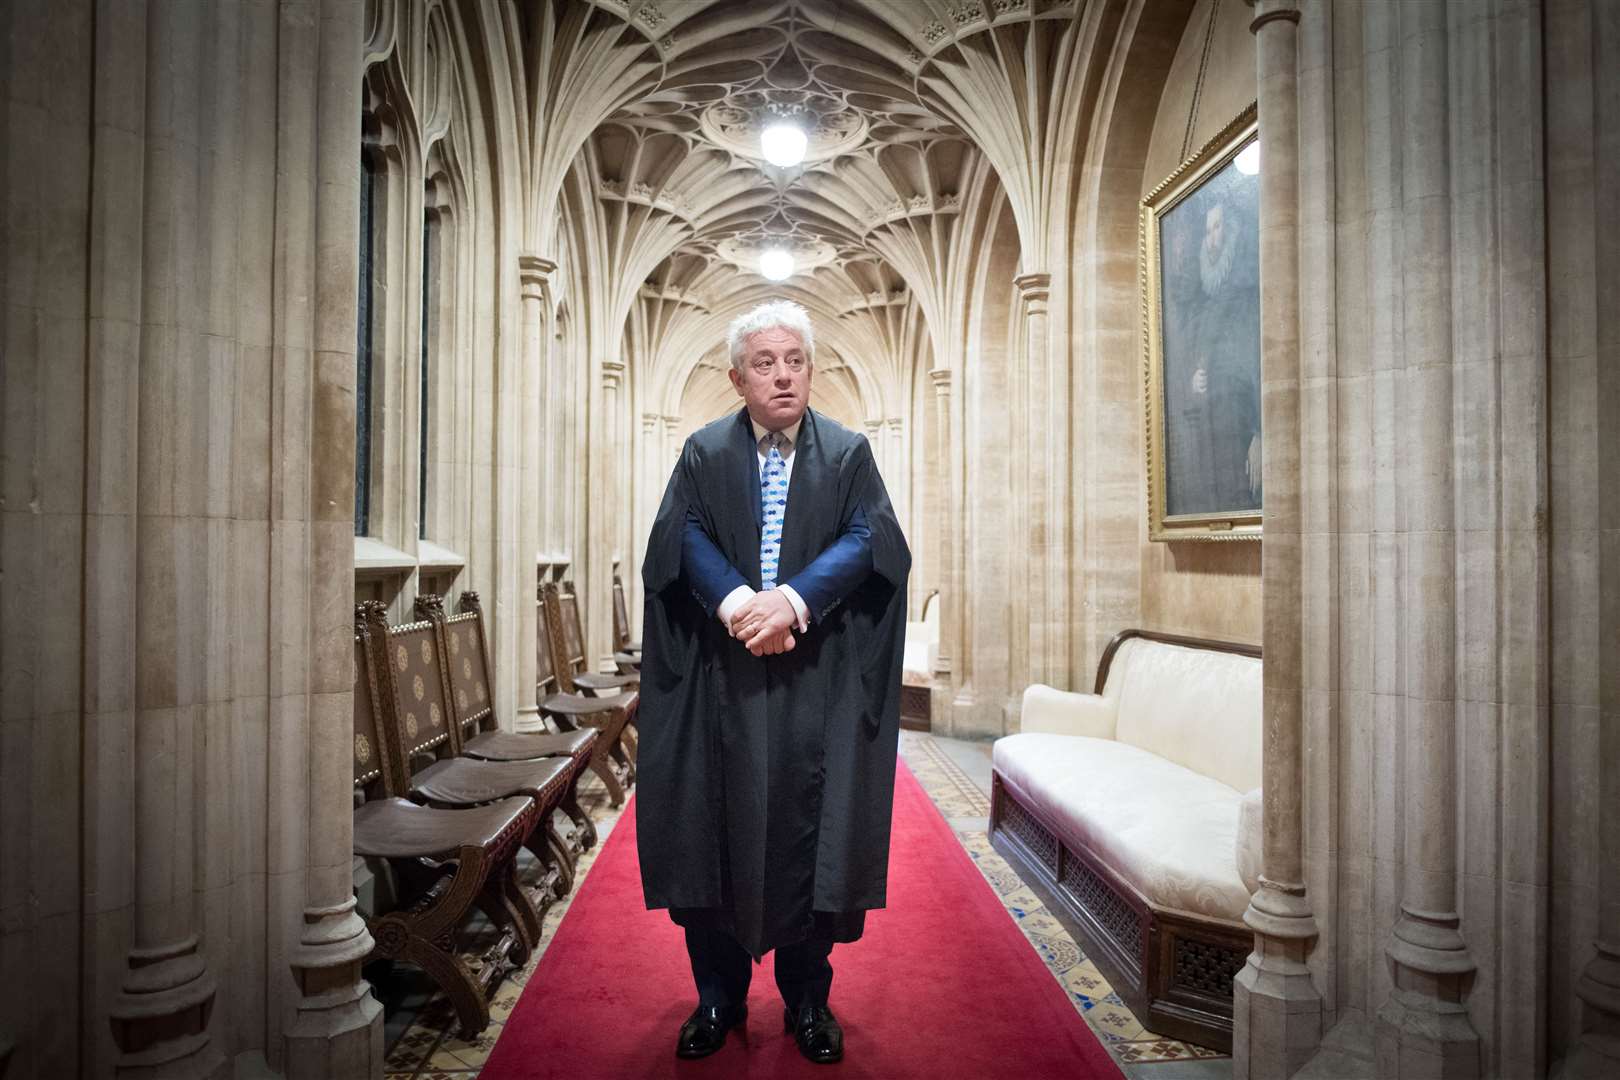 John Bercow going through his daily routine of preparing to preside over the day’s events in the chamber of the House of Commons (Stefan Rousseau/PA)